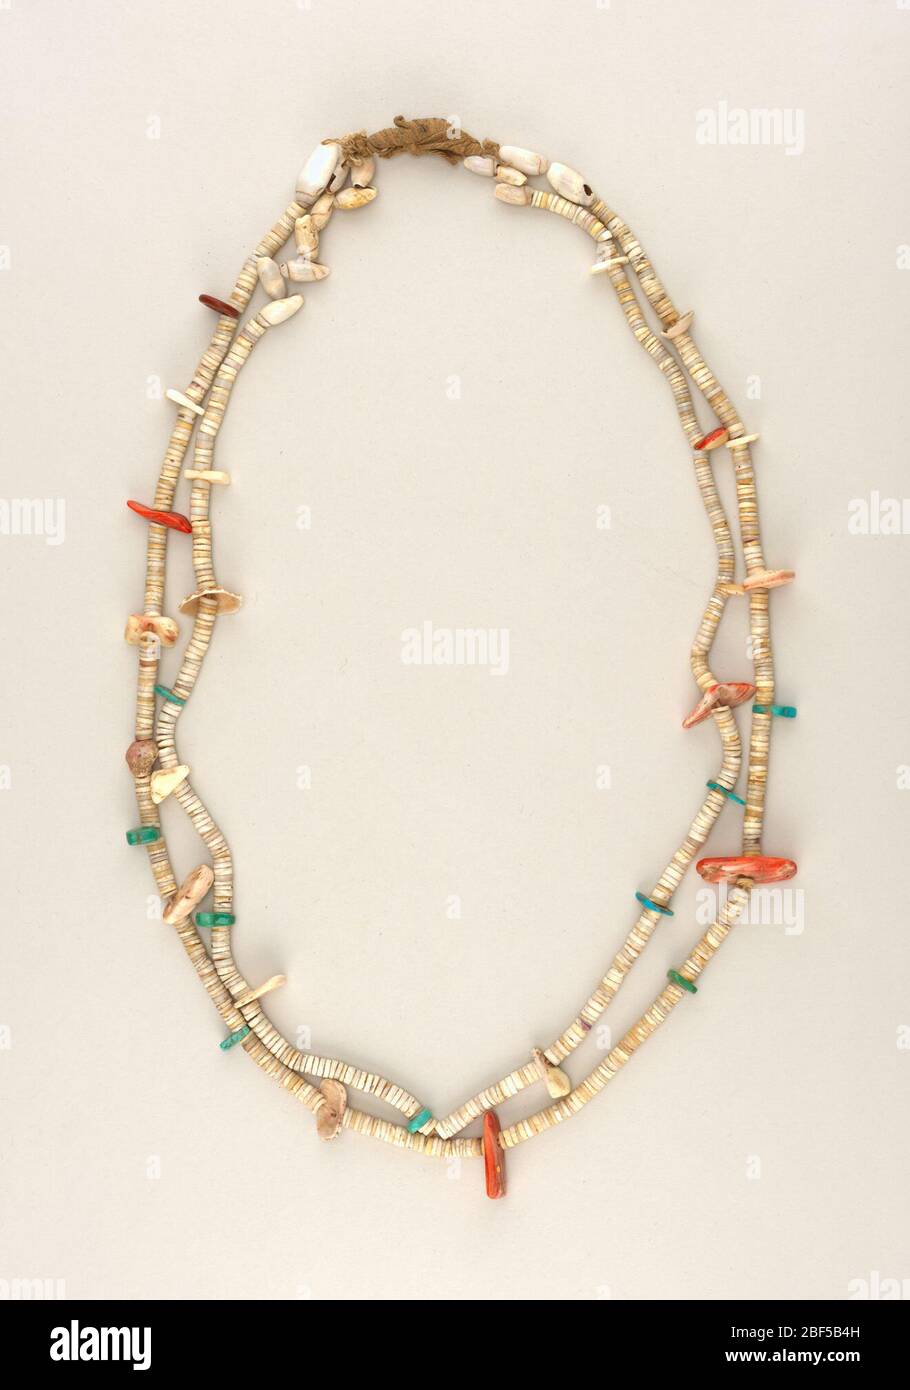 Necklace. Necklace of two strands made of shell discs, whole shells, and larger pieces of turquoise and red stones strung on leather. Stock Photo